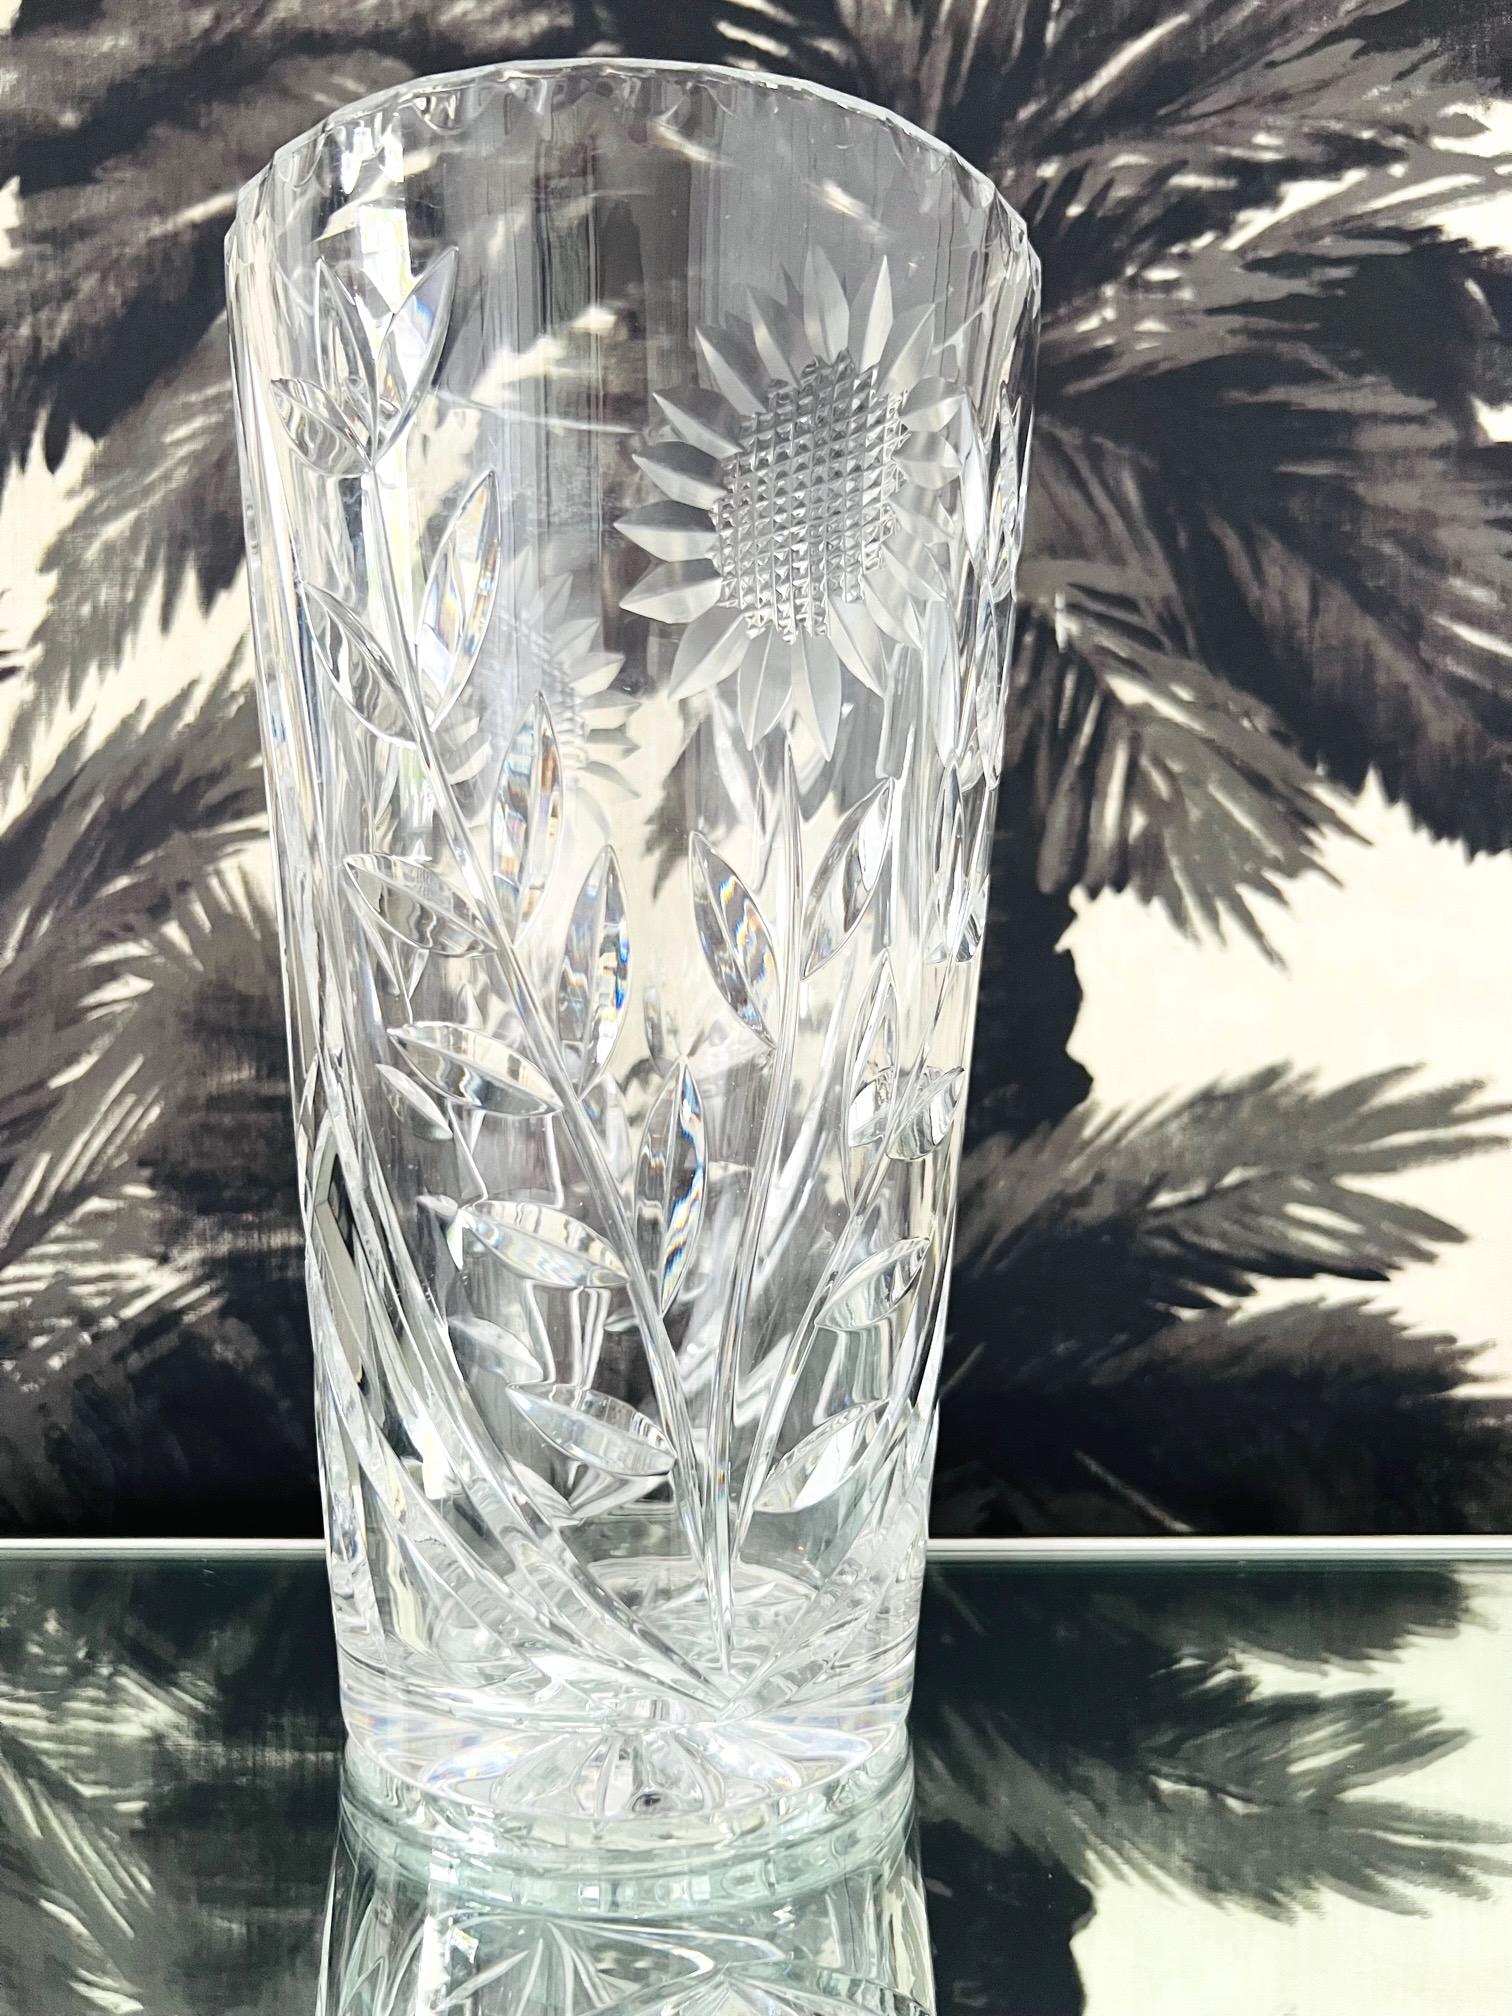 English Waterford Crystal Etched Sunflower Vase with Cut Glass Designs, England, c. 2010 For Sale